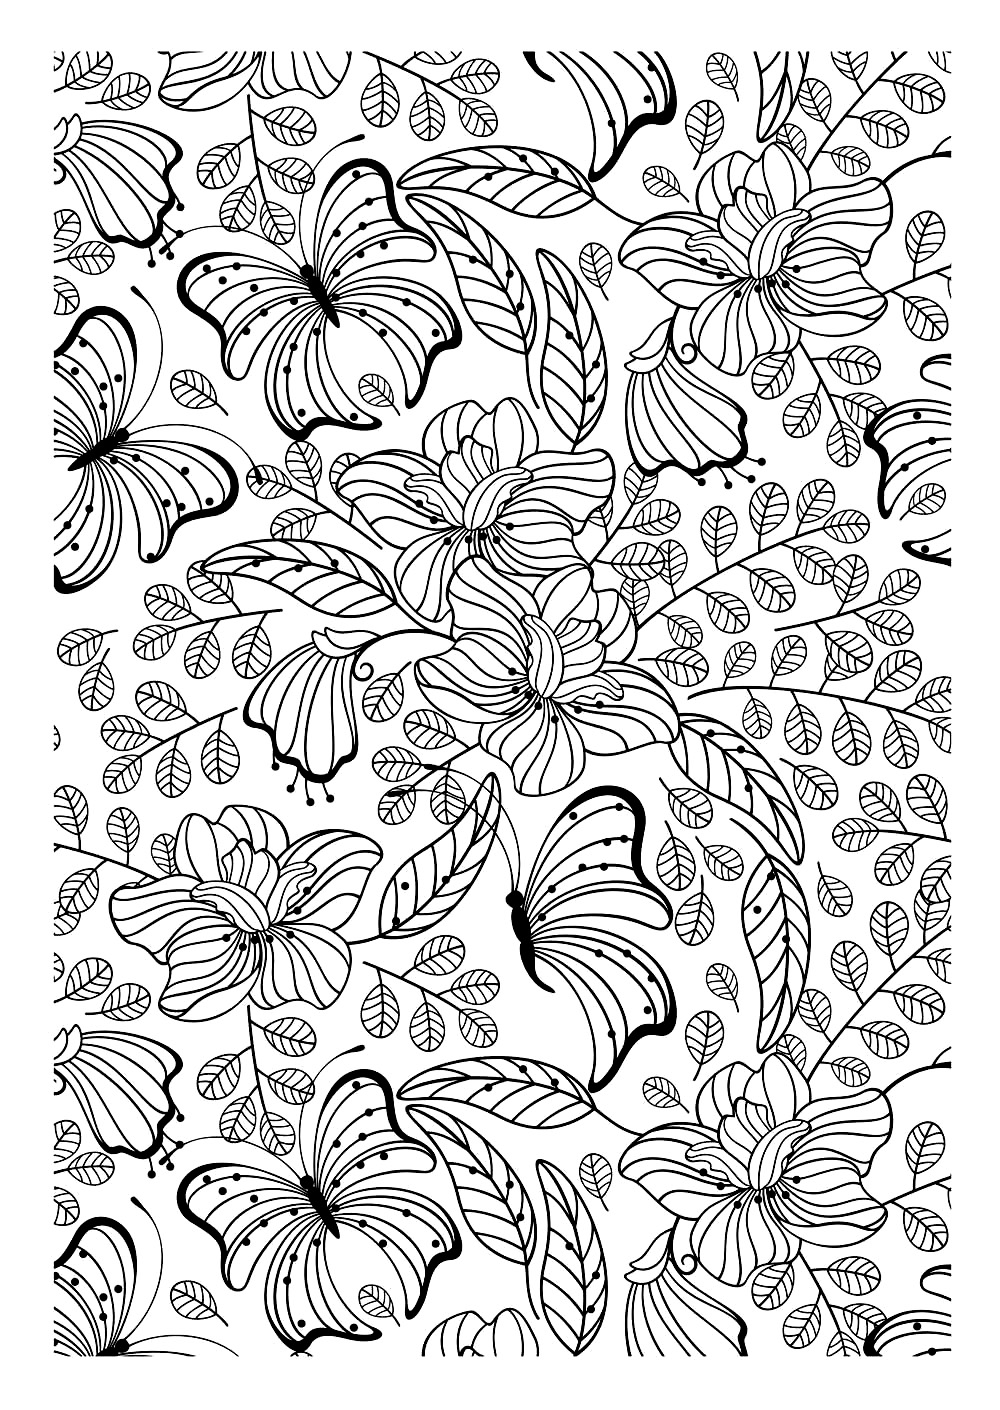 Another image to print and to color filled with pretty leaves, flowers and butterflies, which is certainly an interesting adult coloring page to achieve